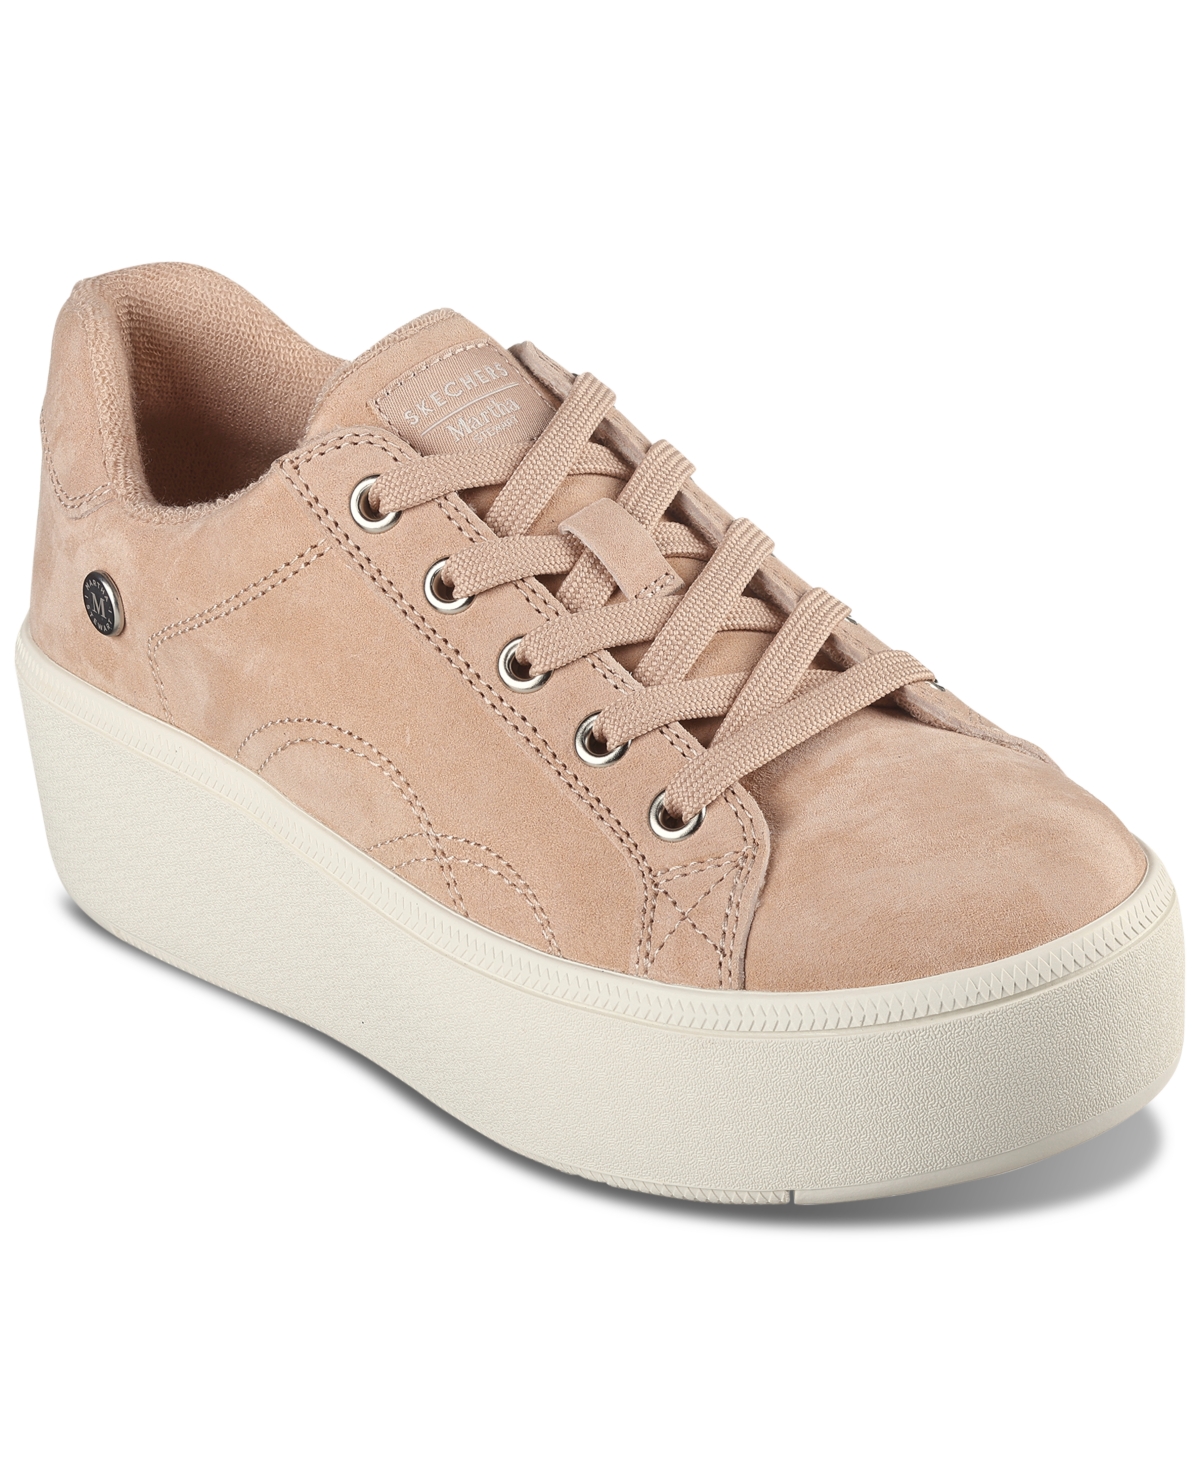 Women's Martha Stewart Plateau Chic Lady Casual Sneakers from Finish Line - Rose